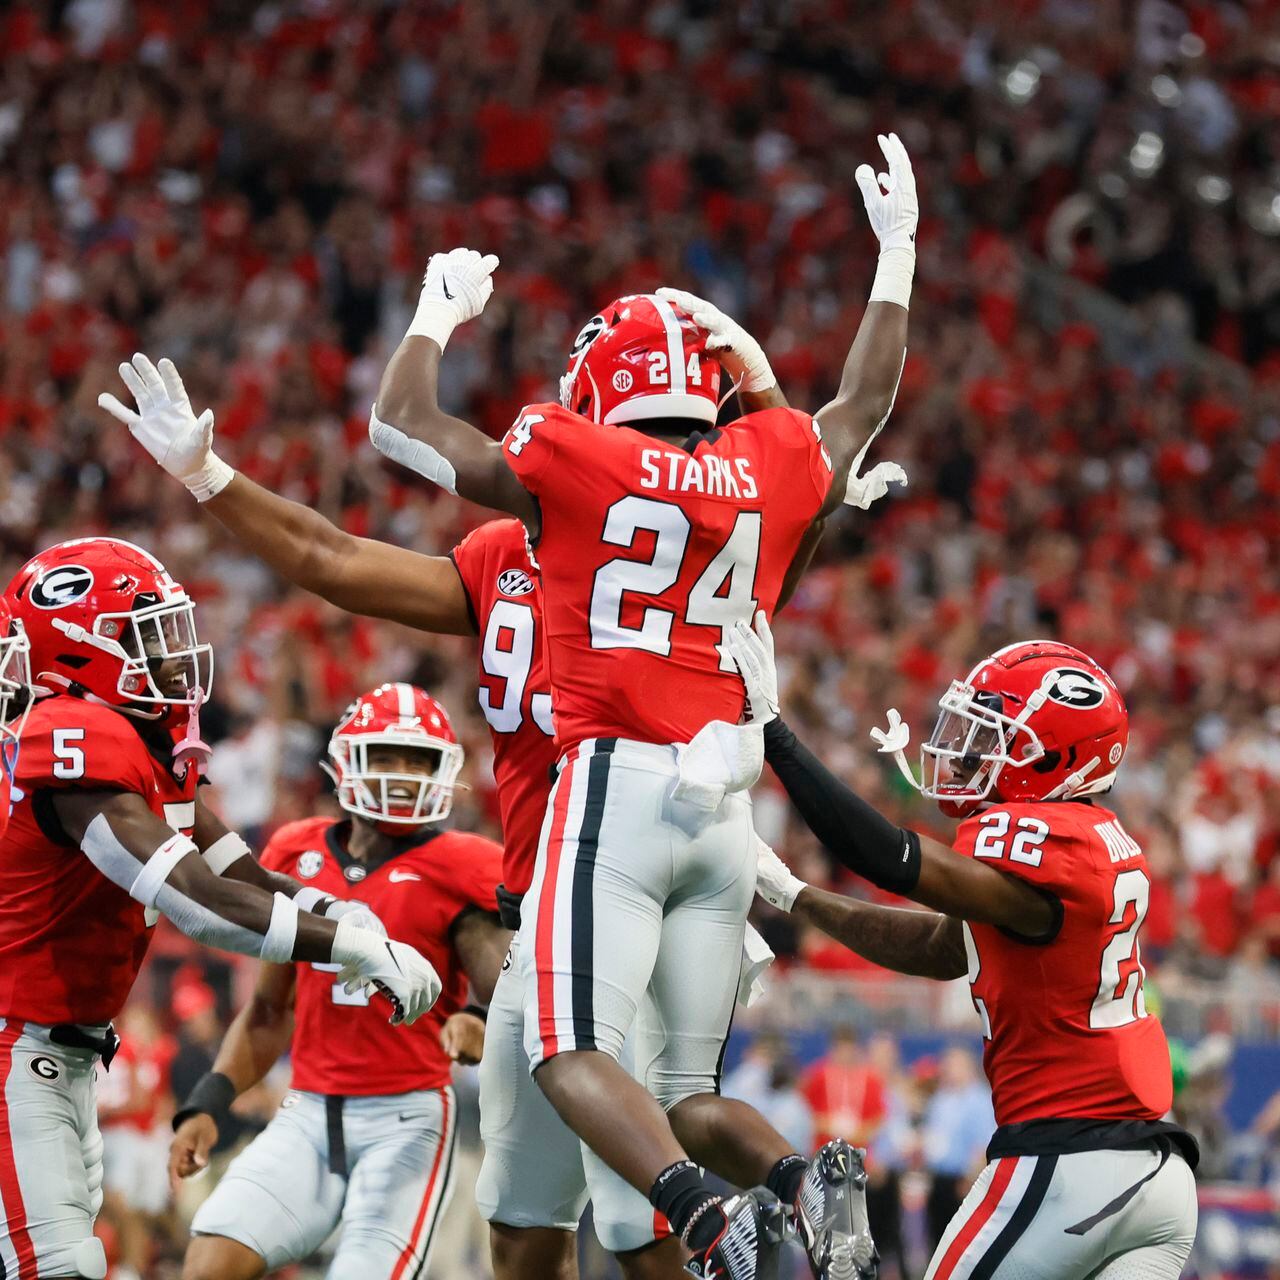 Georgia to wear home red jerseys in 2019 SEC Championship Game